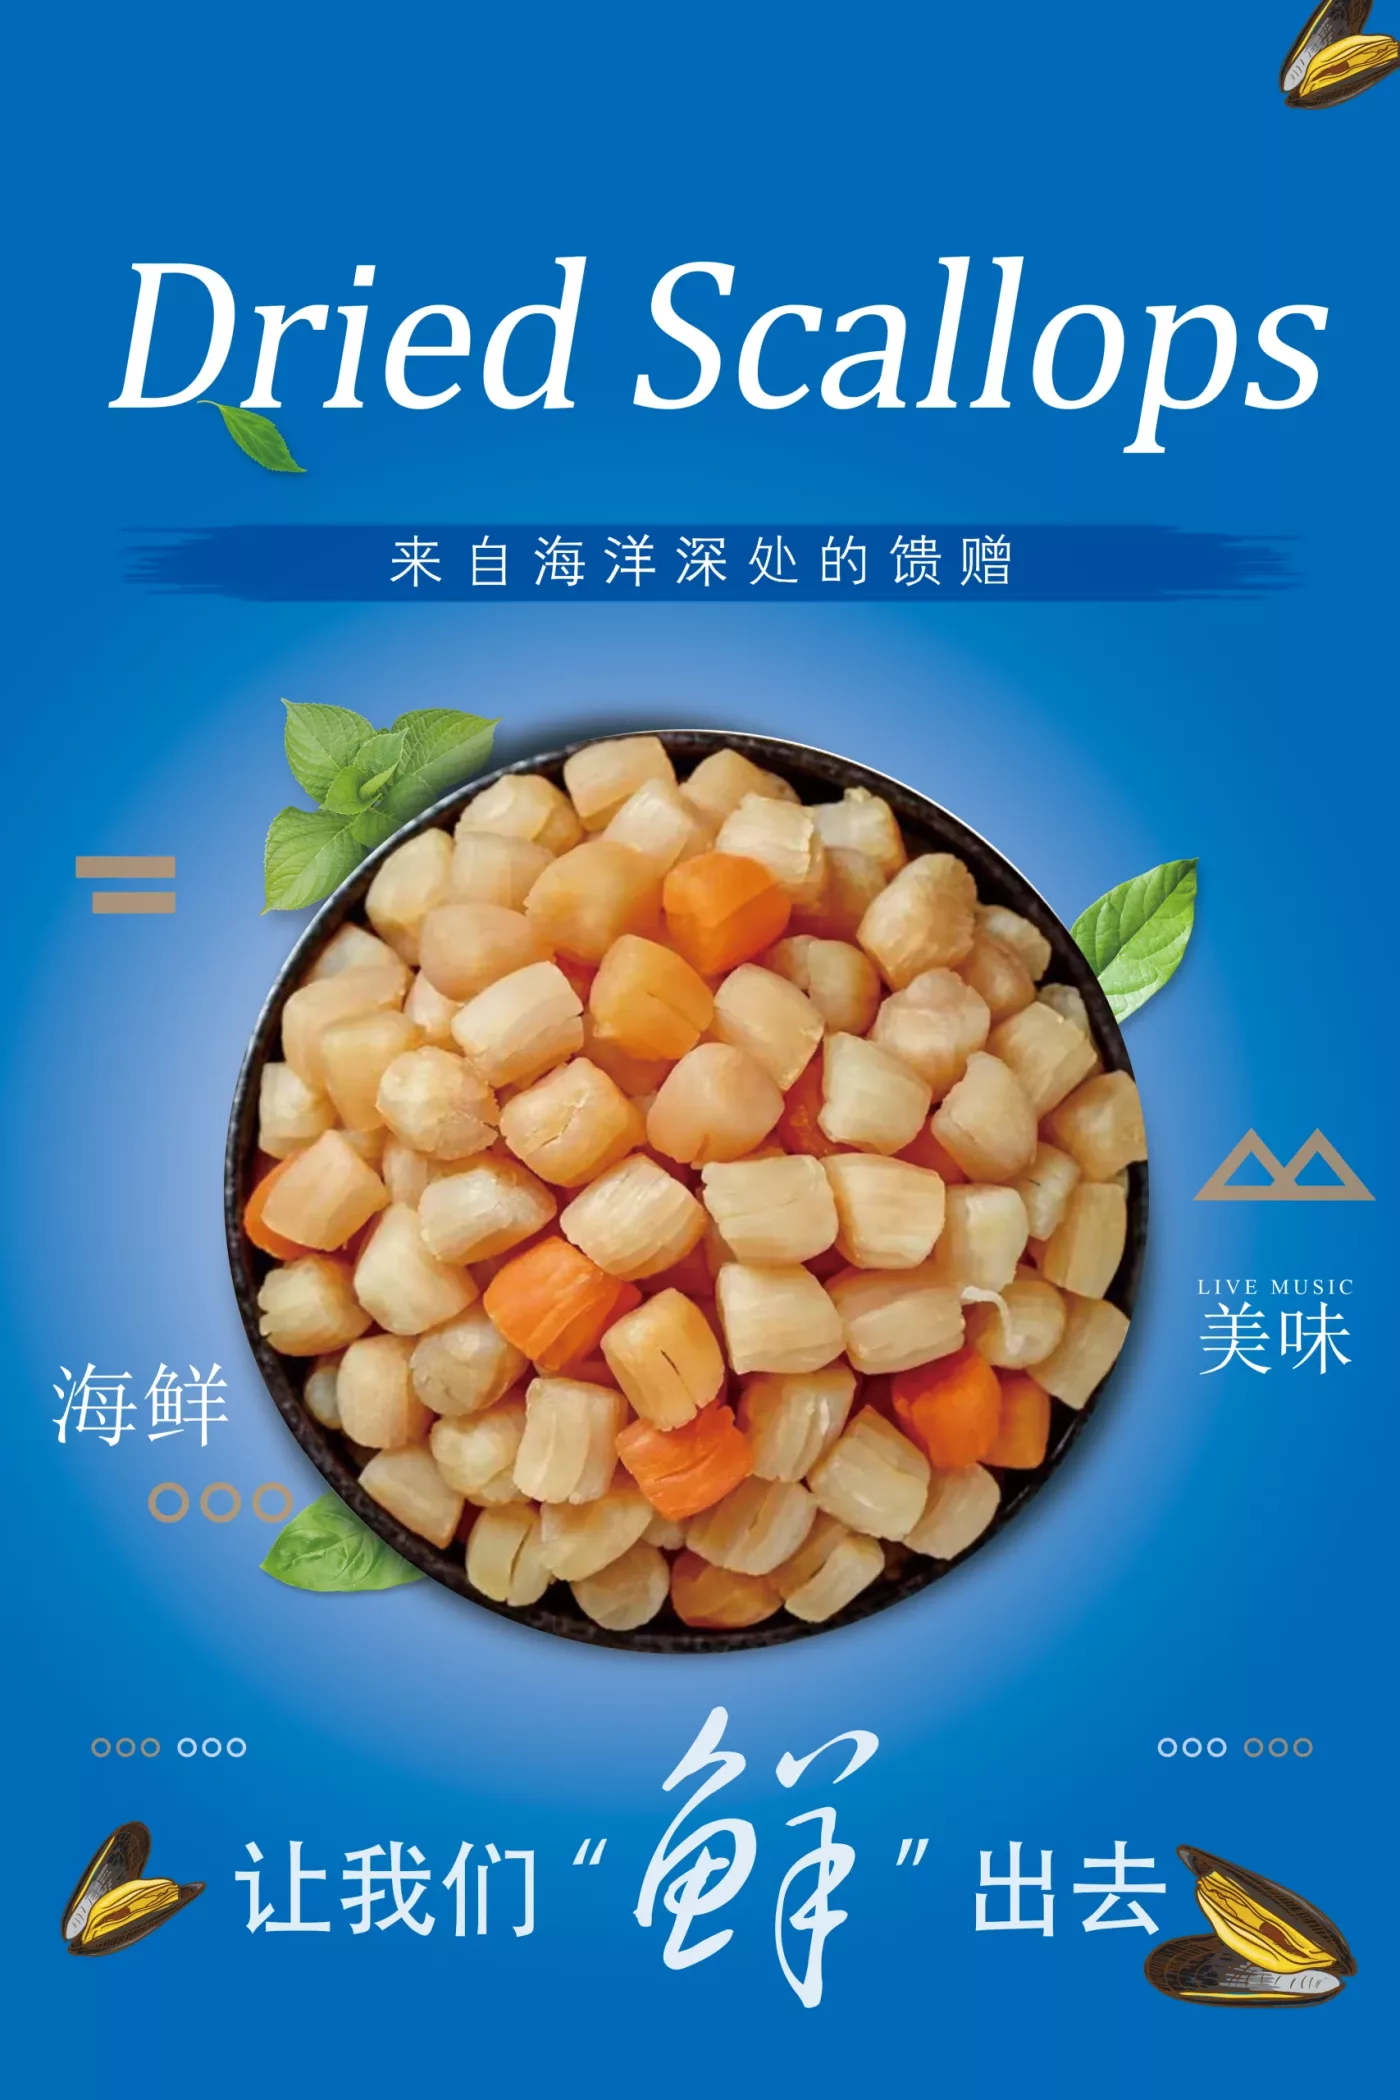 bay scallops in Chinese